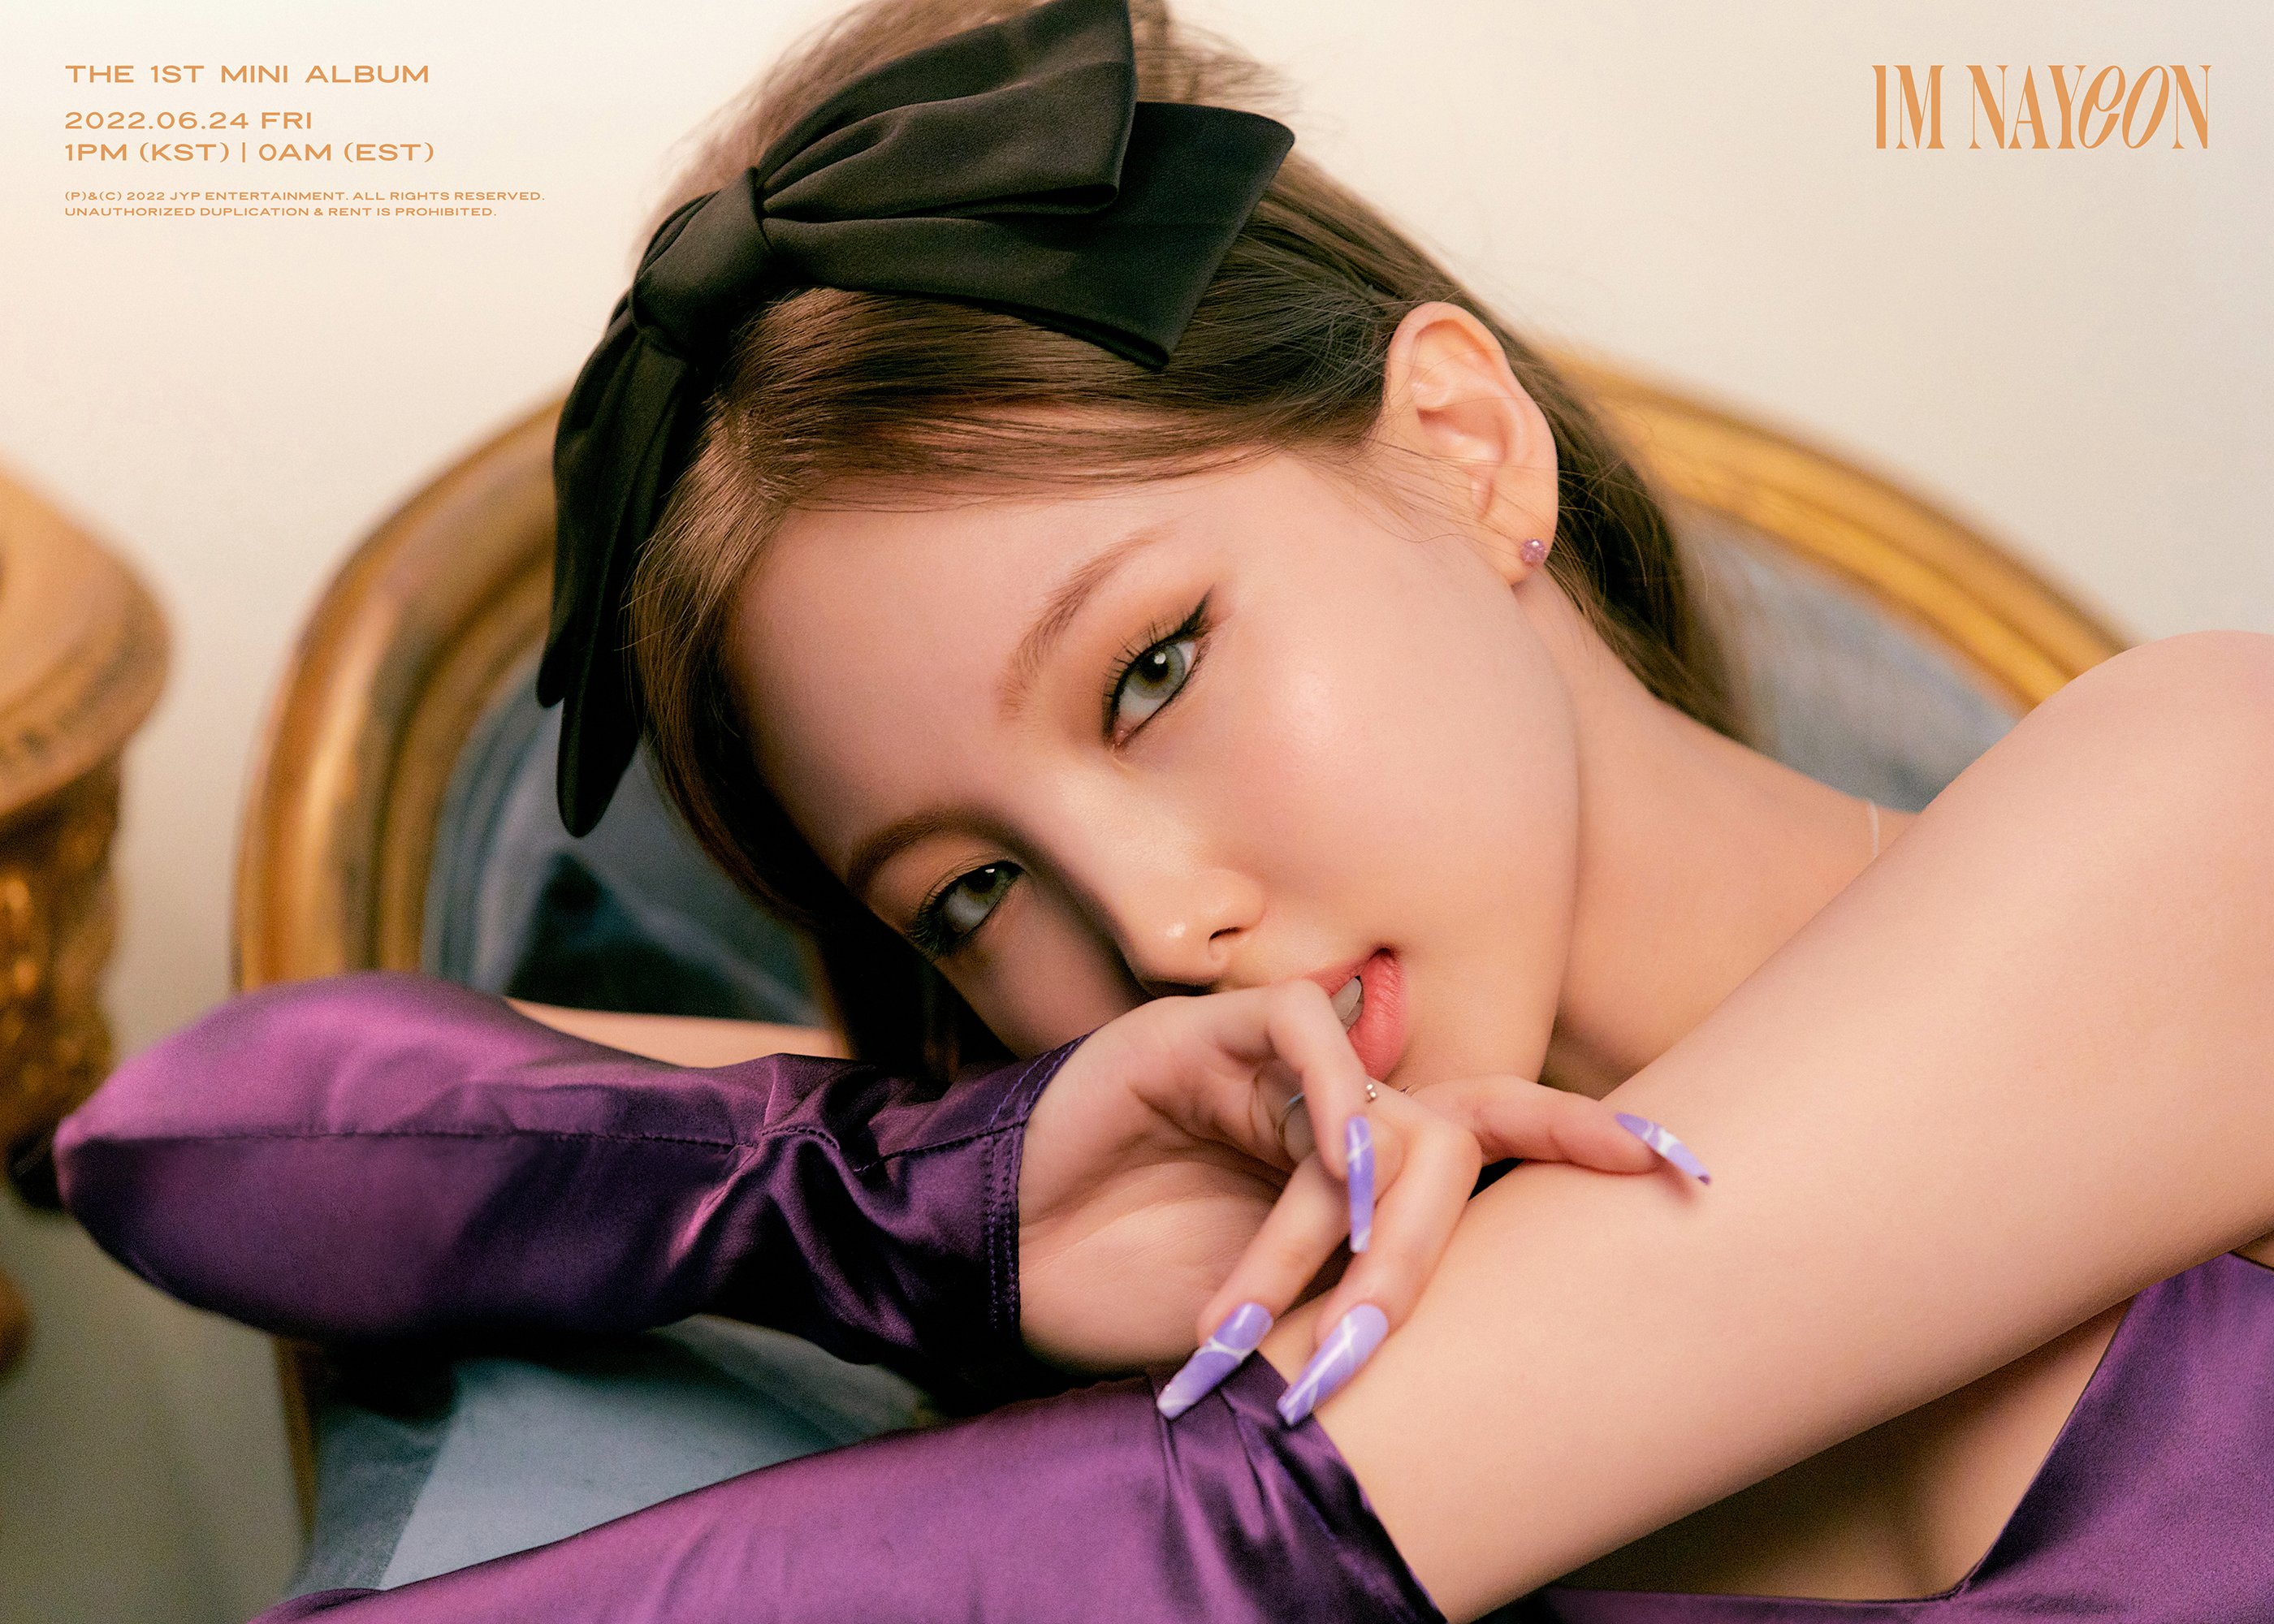 TWICE's Nayeon opens up about dealing with hate: “Once you fall into it,  it's hard to get away